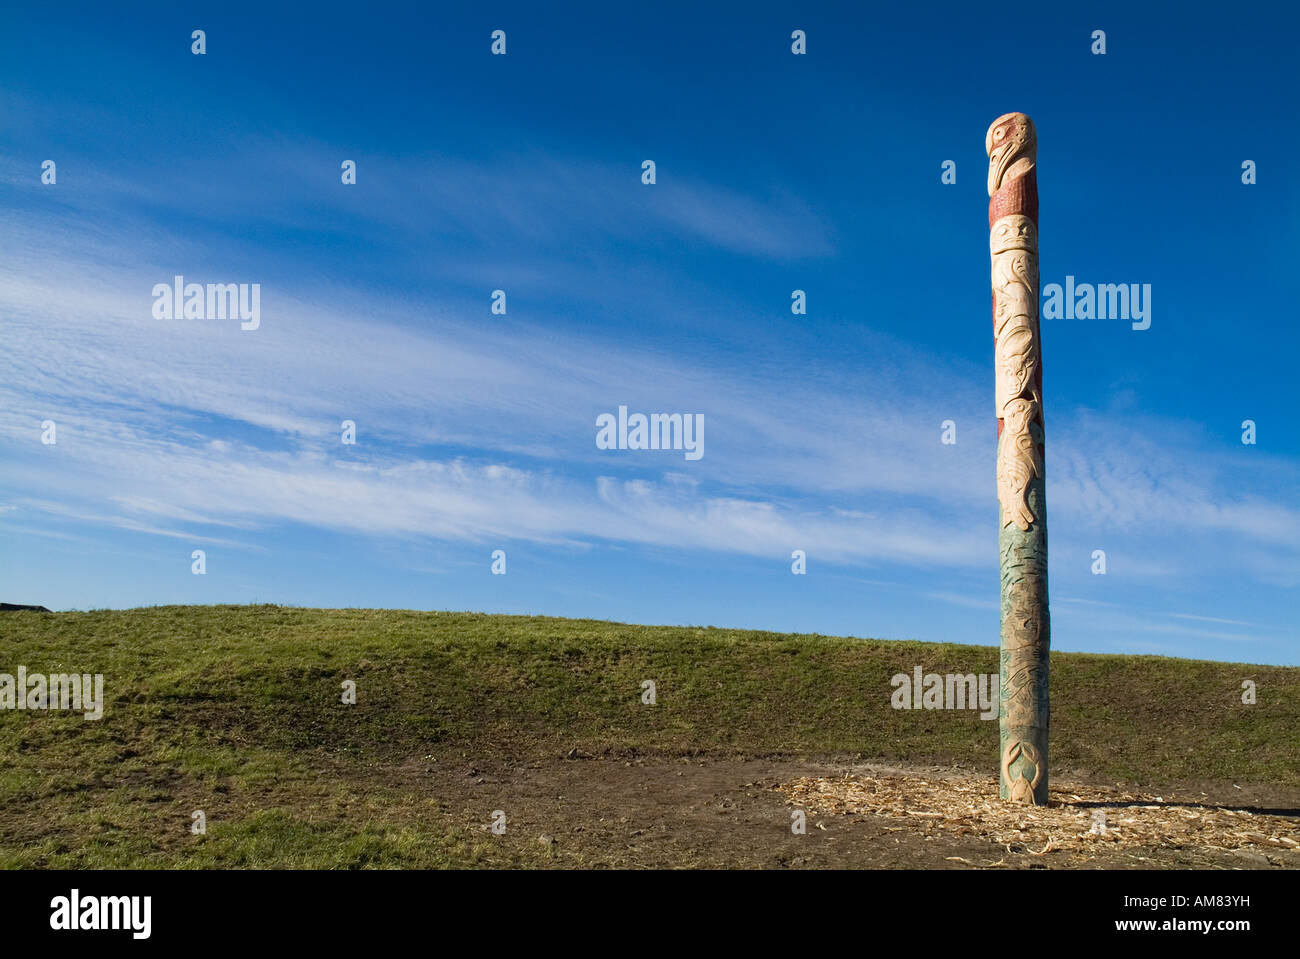 dh Totem pole HOLM ORKNEY Native Canadian Squamish Indian and Orcadian Totem Pole wooden art carved Stock Photo